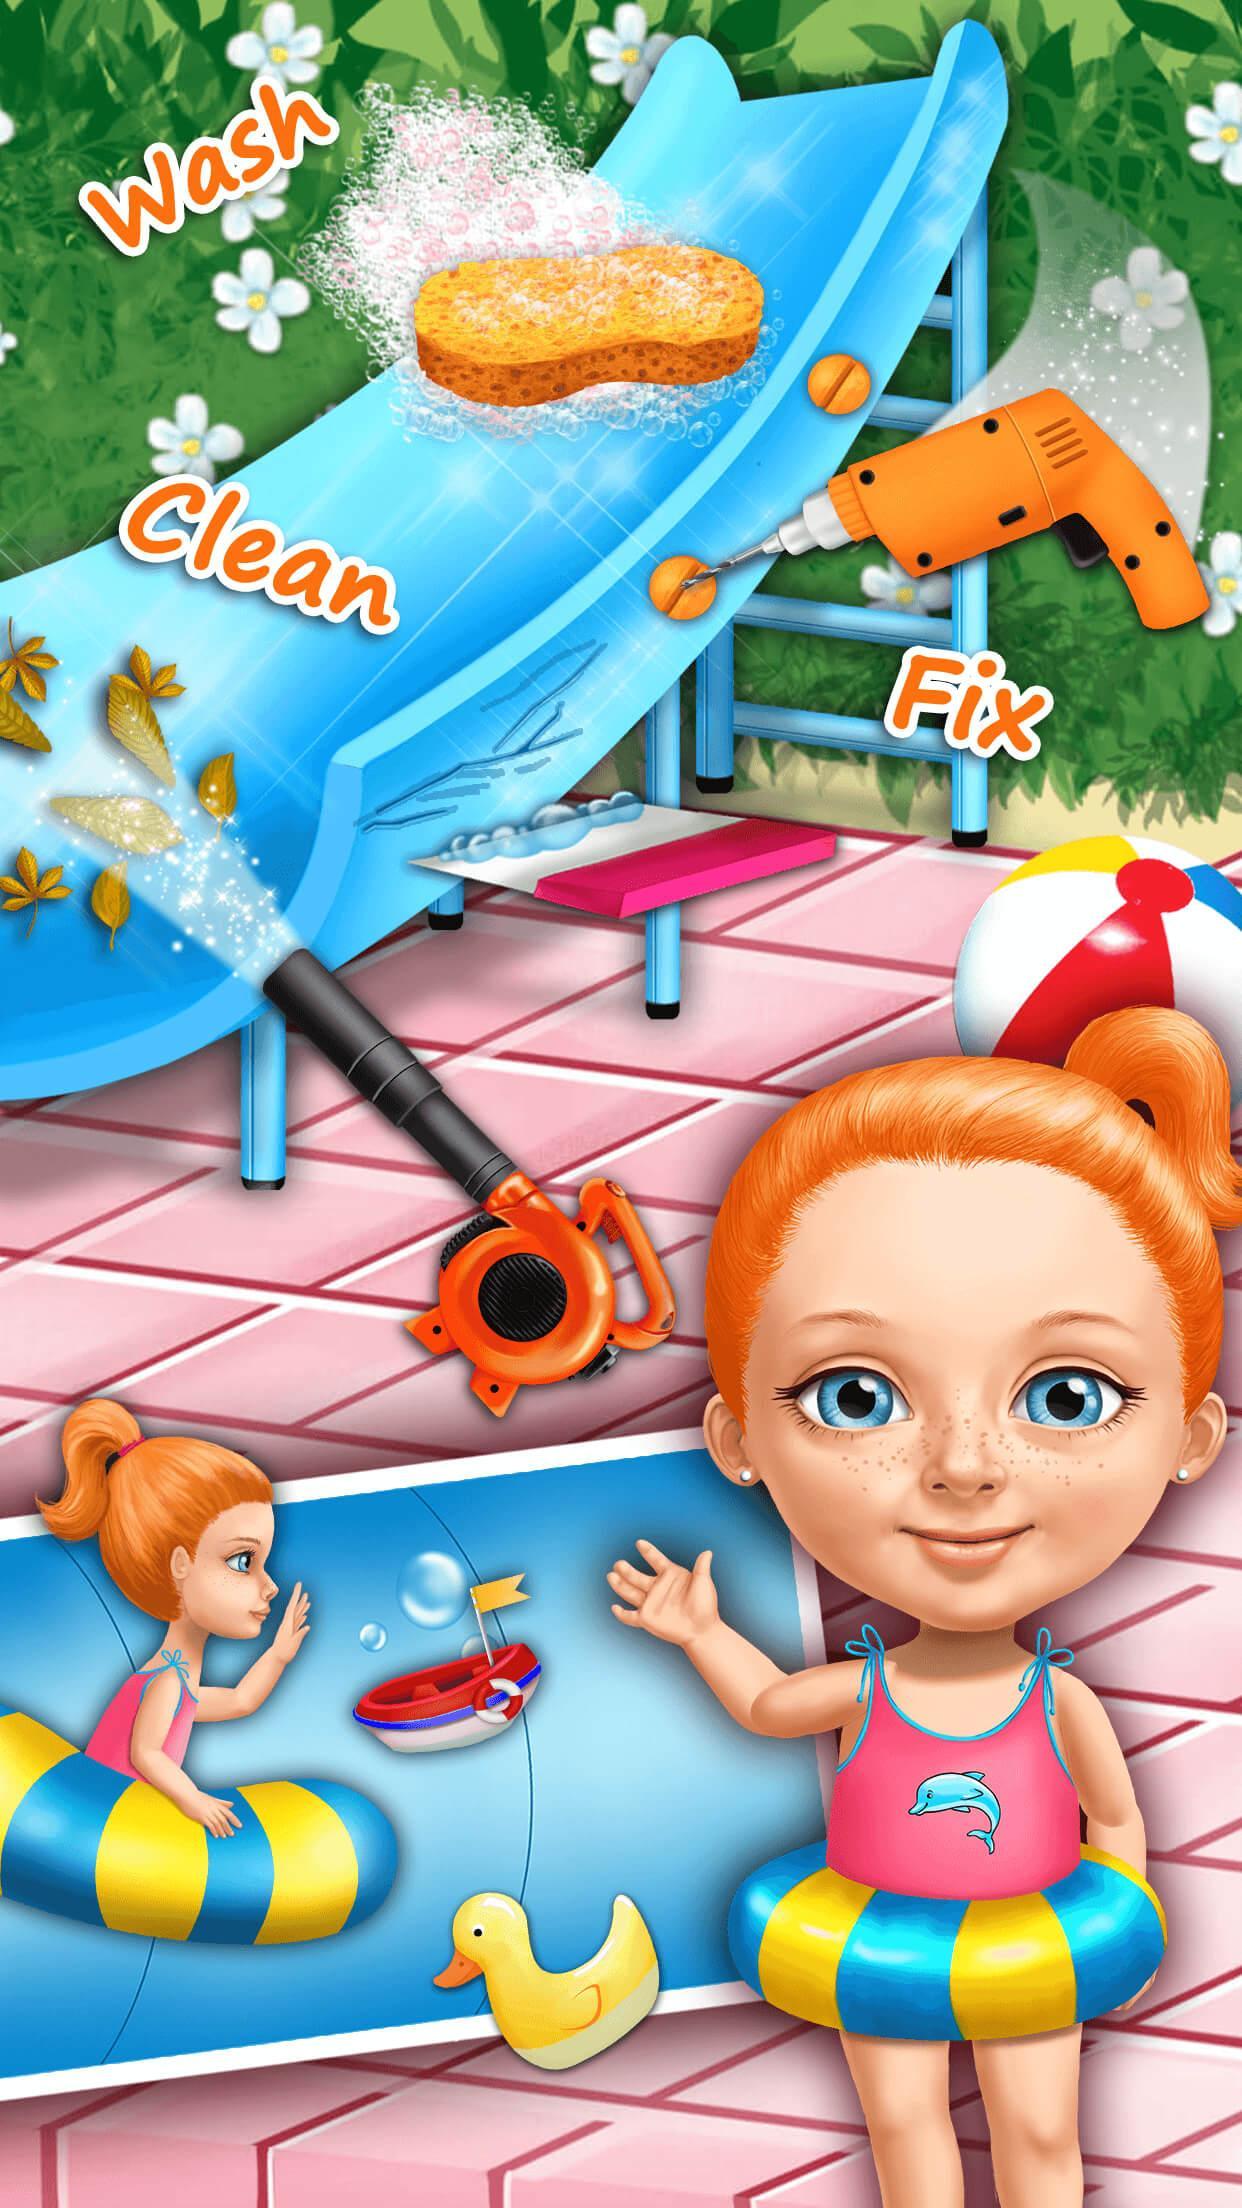 Sweet Baby Girl Cleanup 4 - House, Pool & Stable 4.0.10003 Screenshot 4